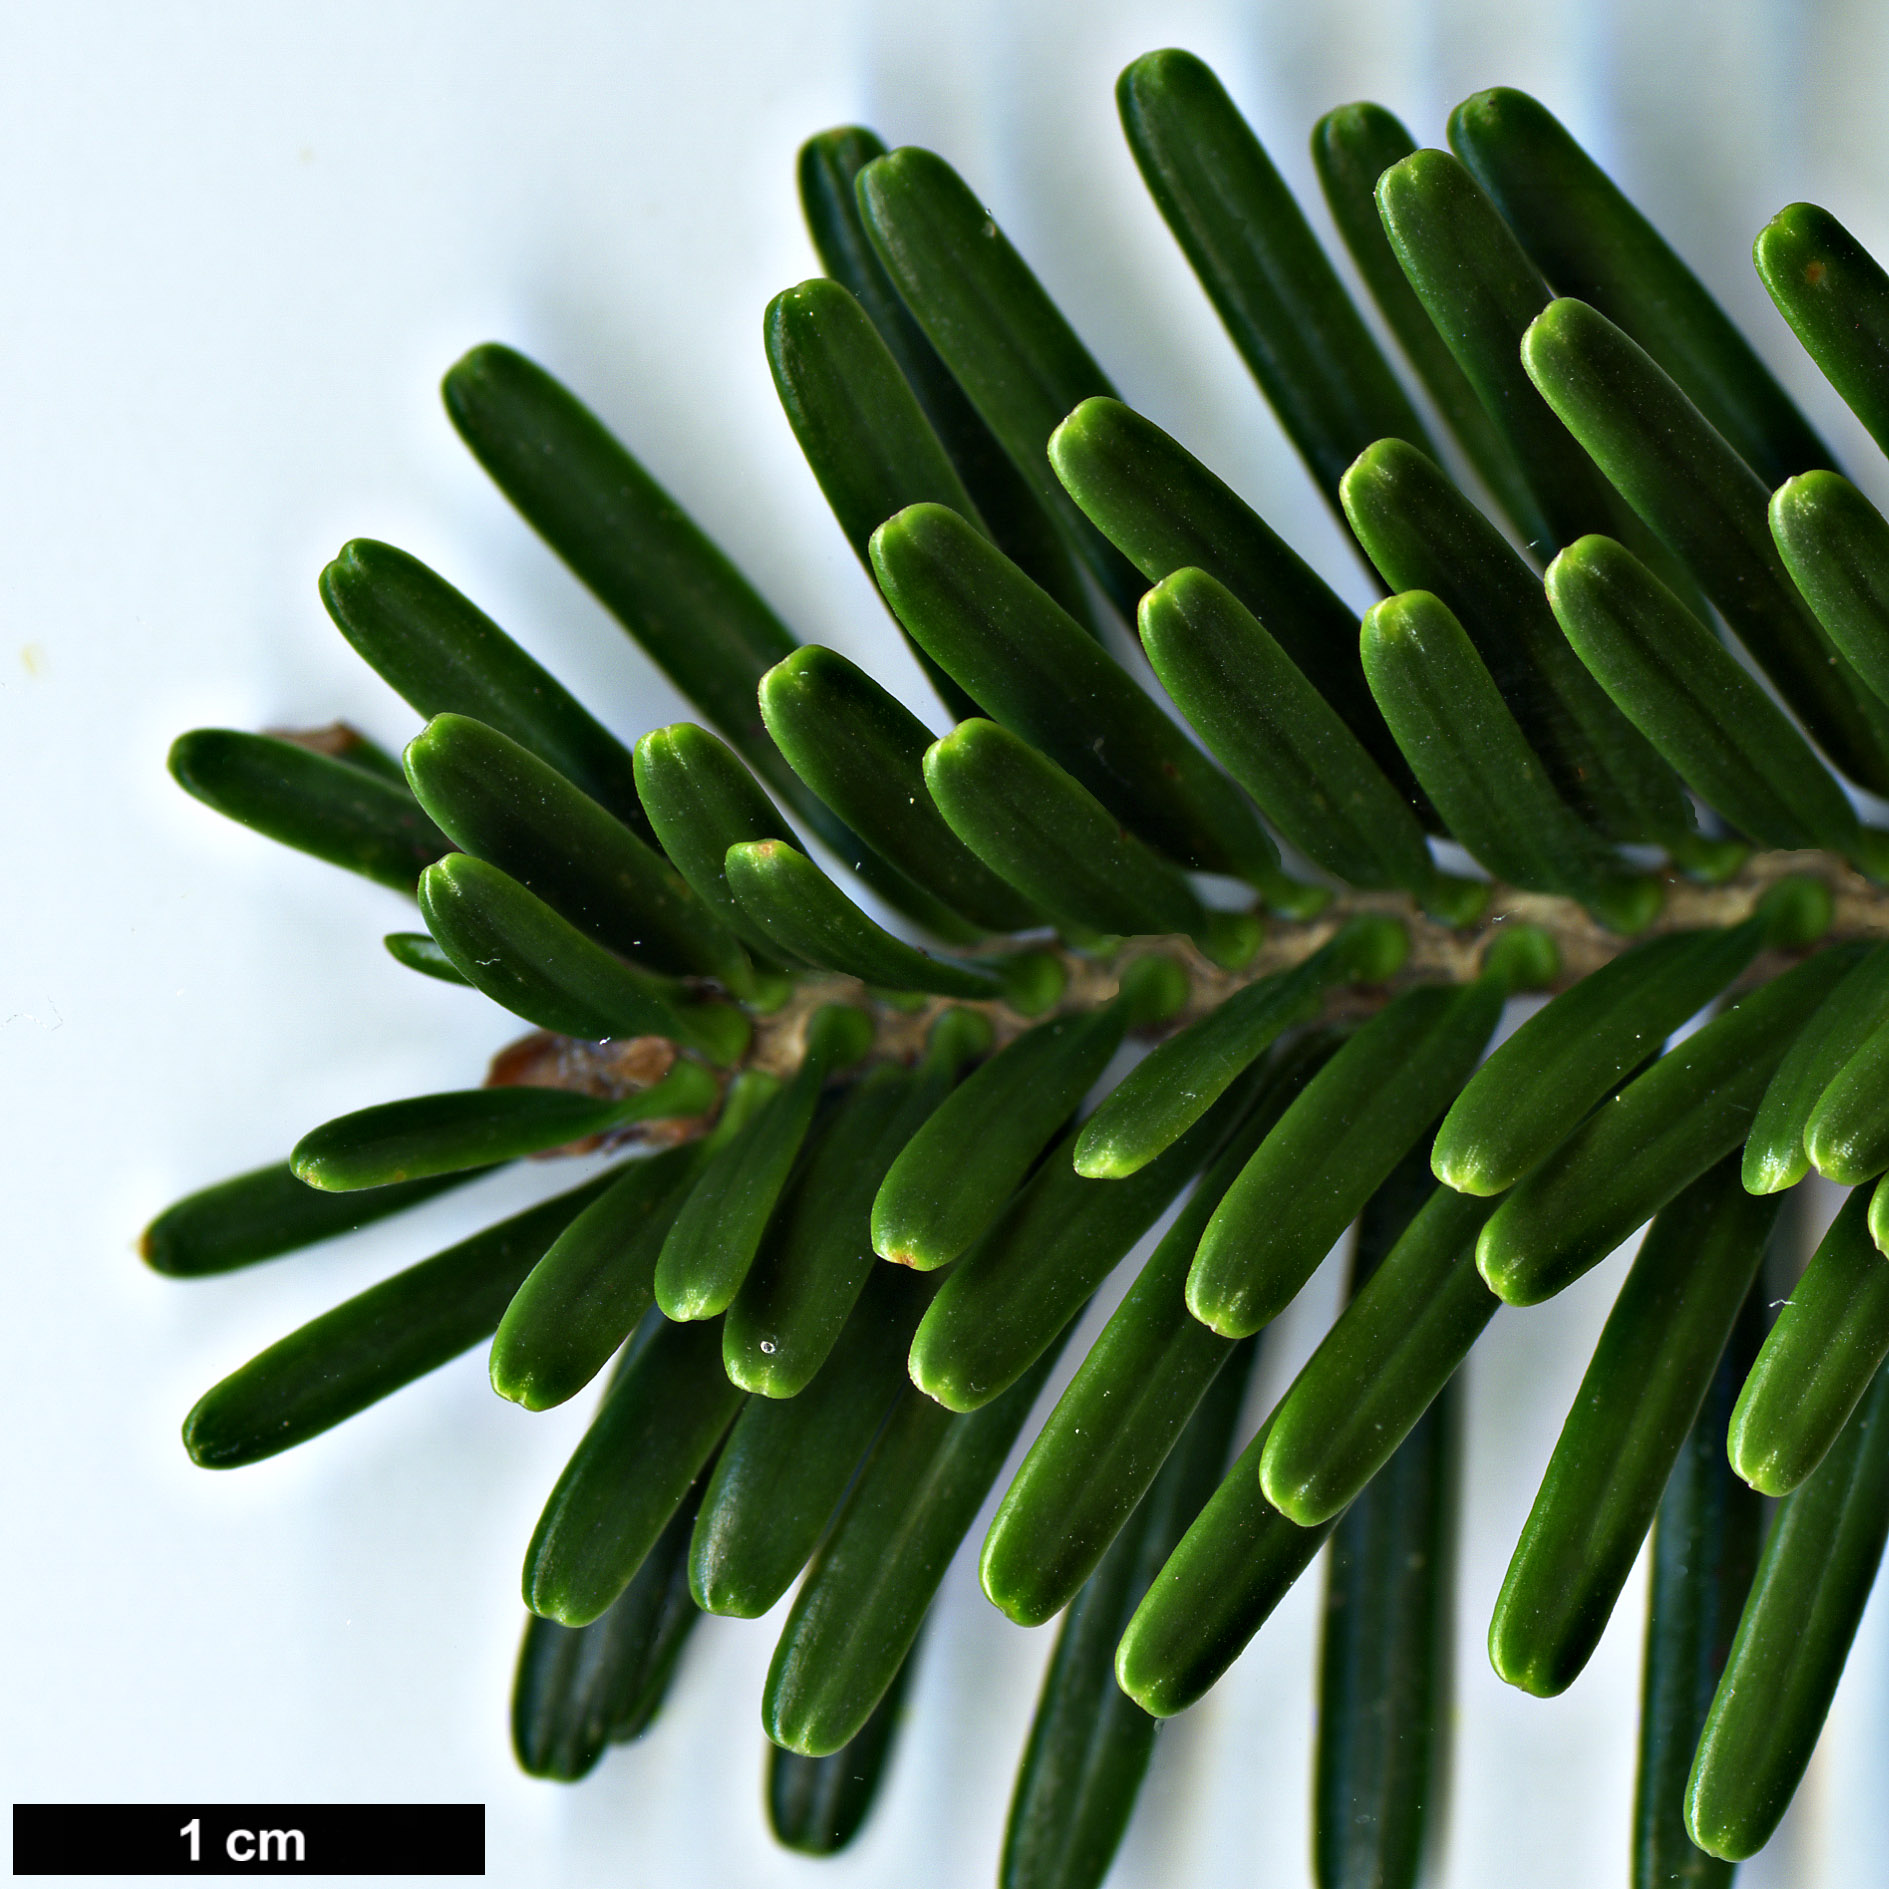 High resolution image: Family: Pinaceae - Genus: Abies - Taxon: nebrodensis